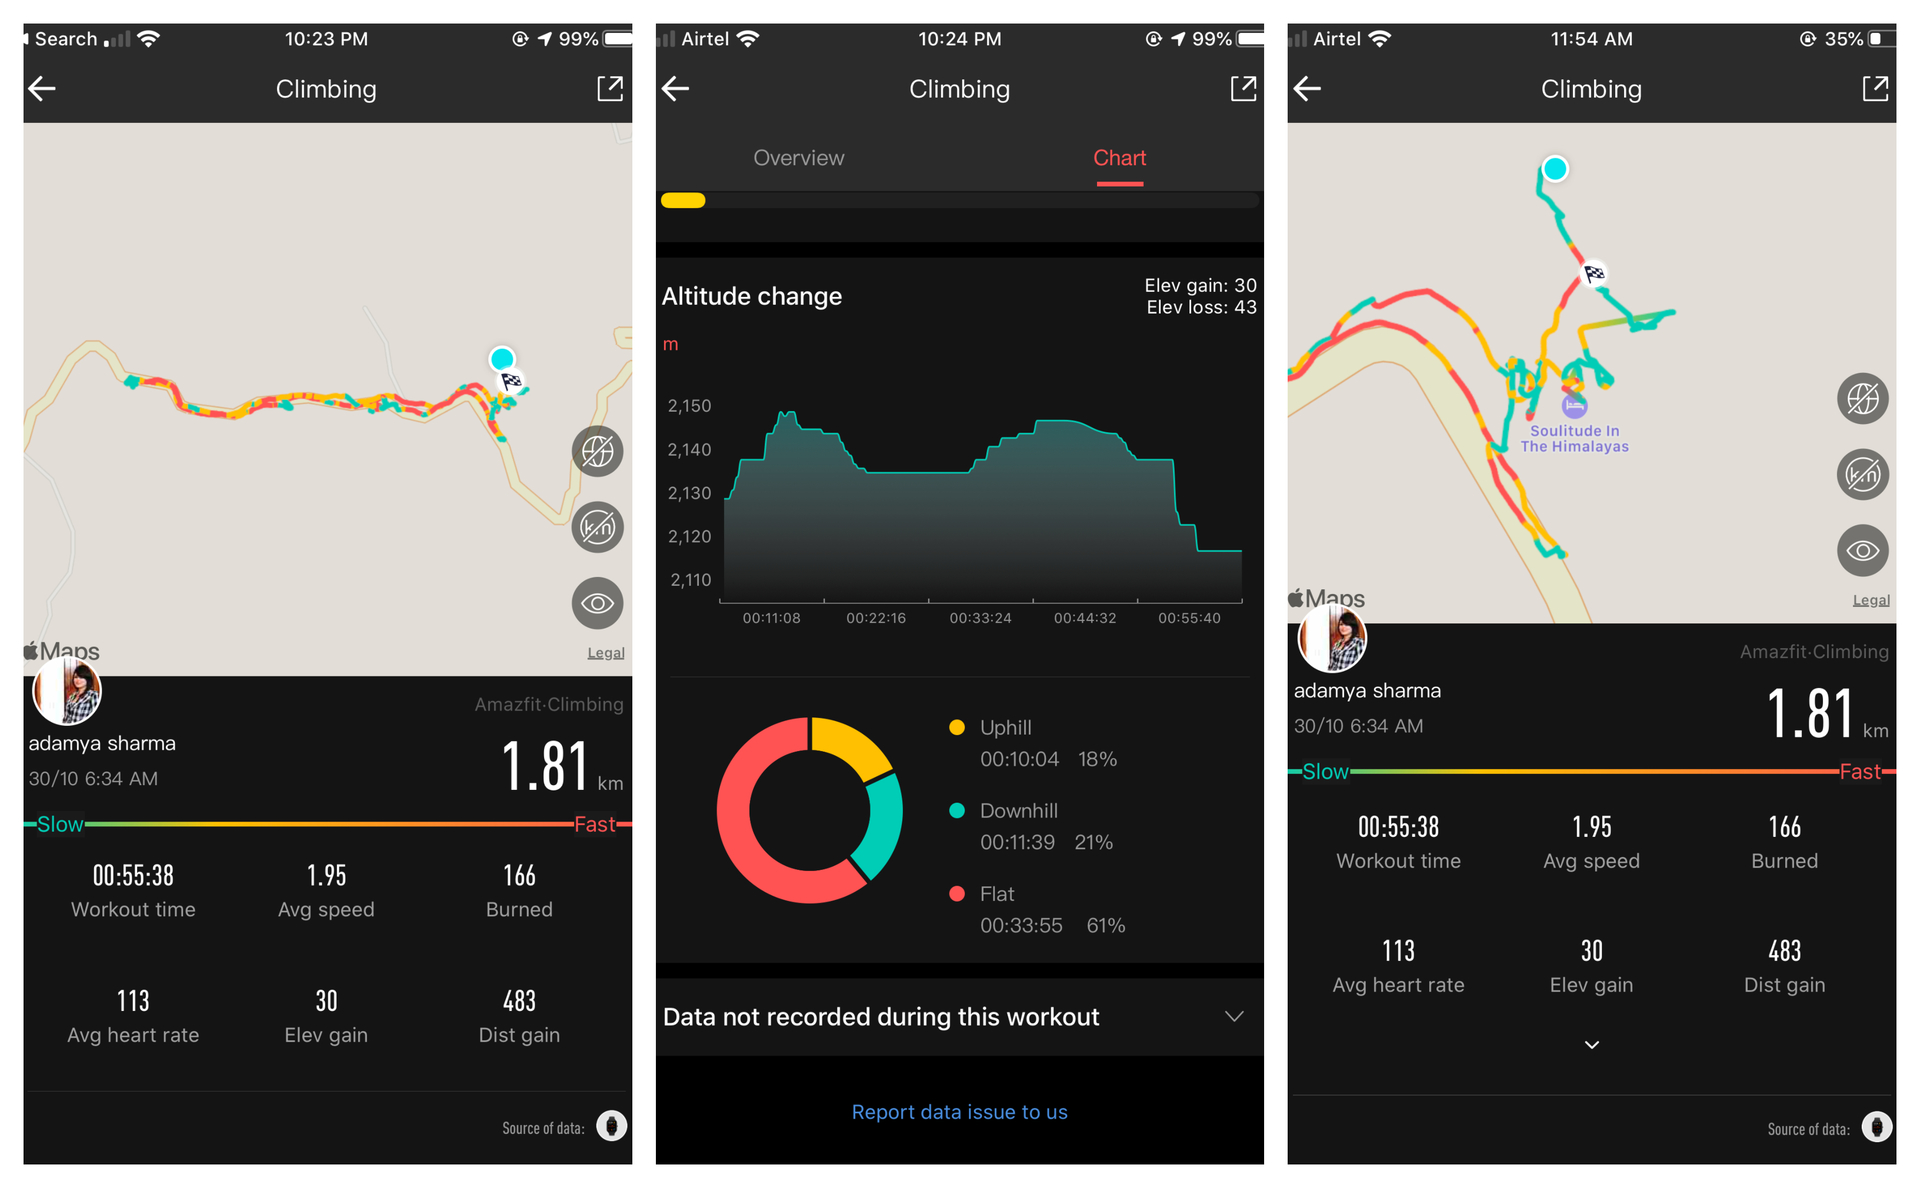 Amazfit GTS GPS and Clinbing Stats